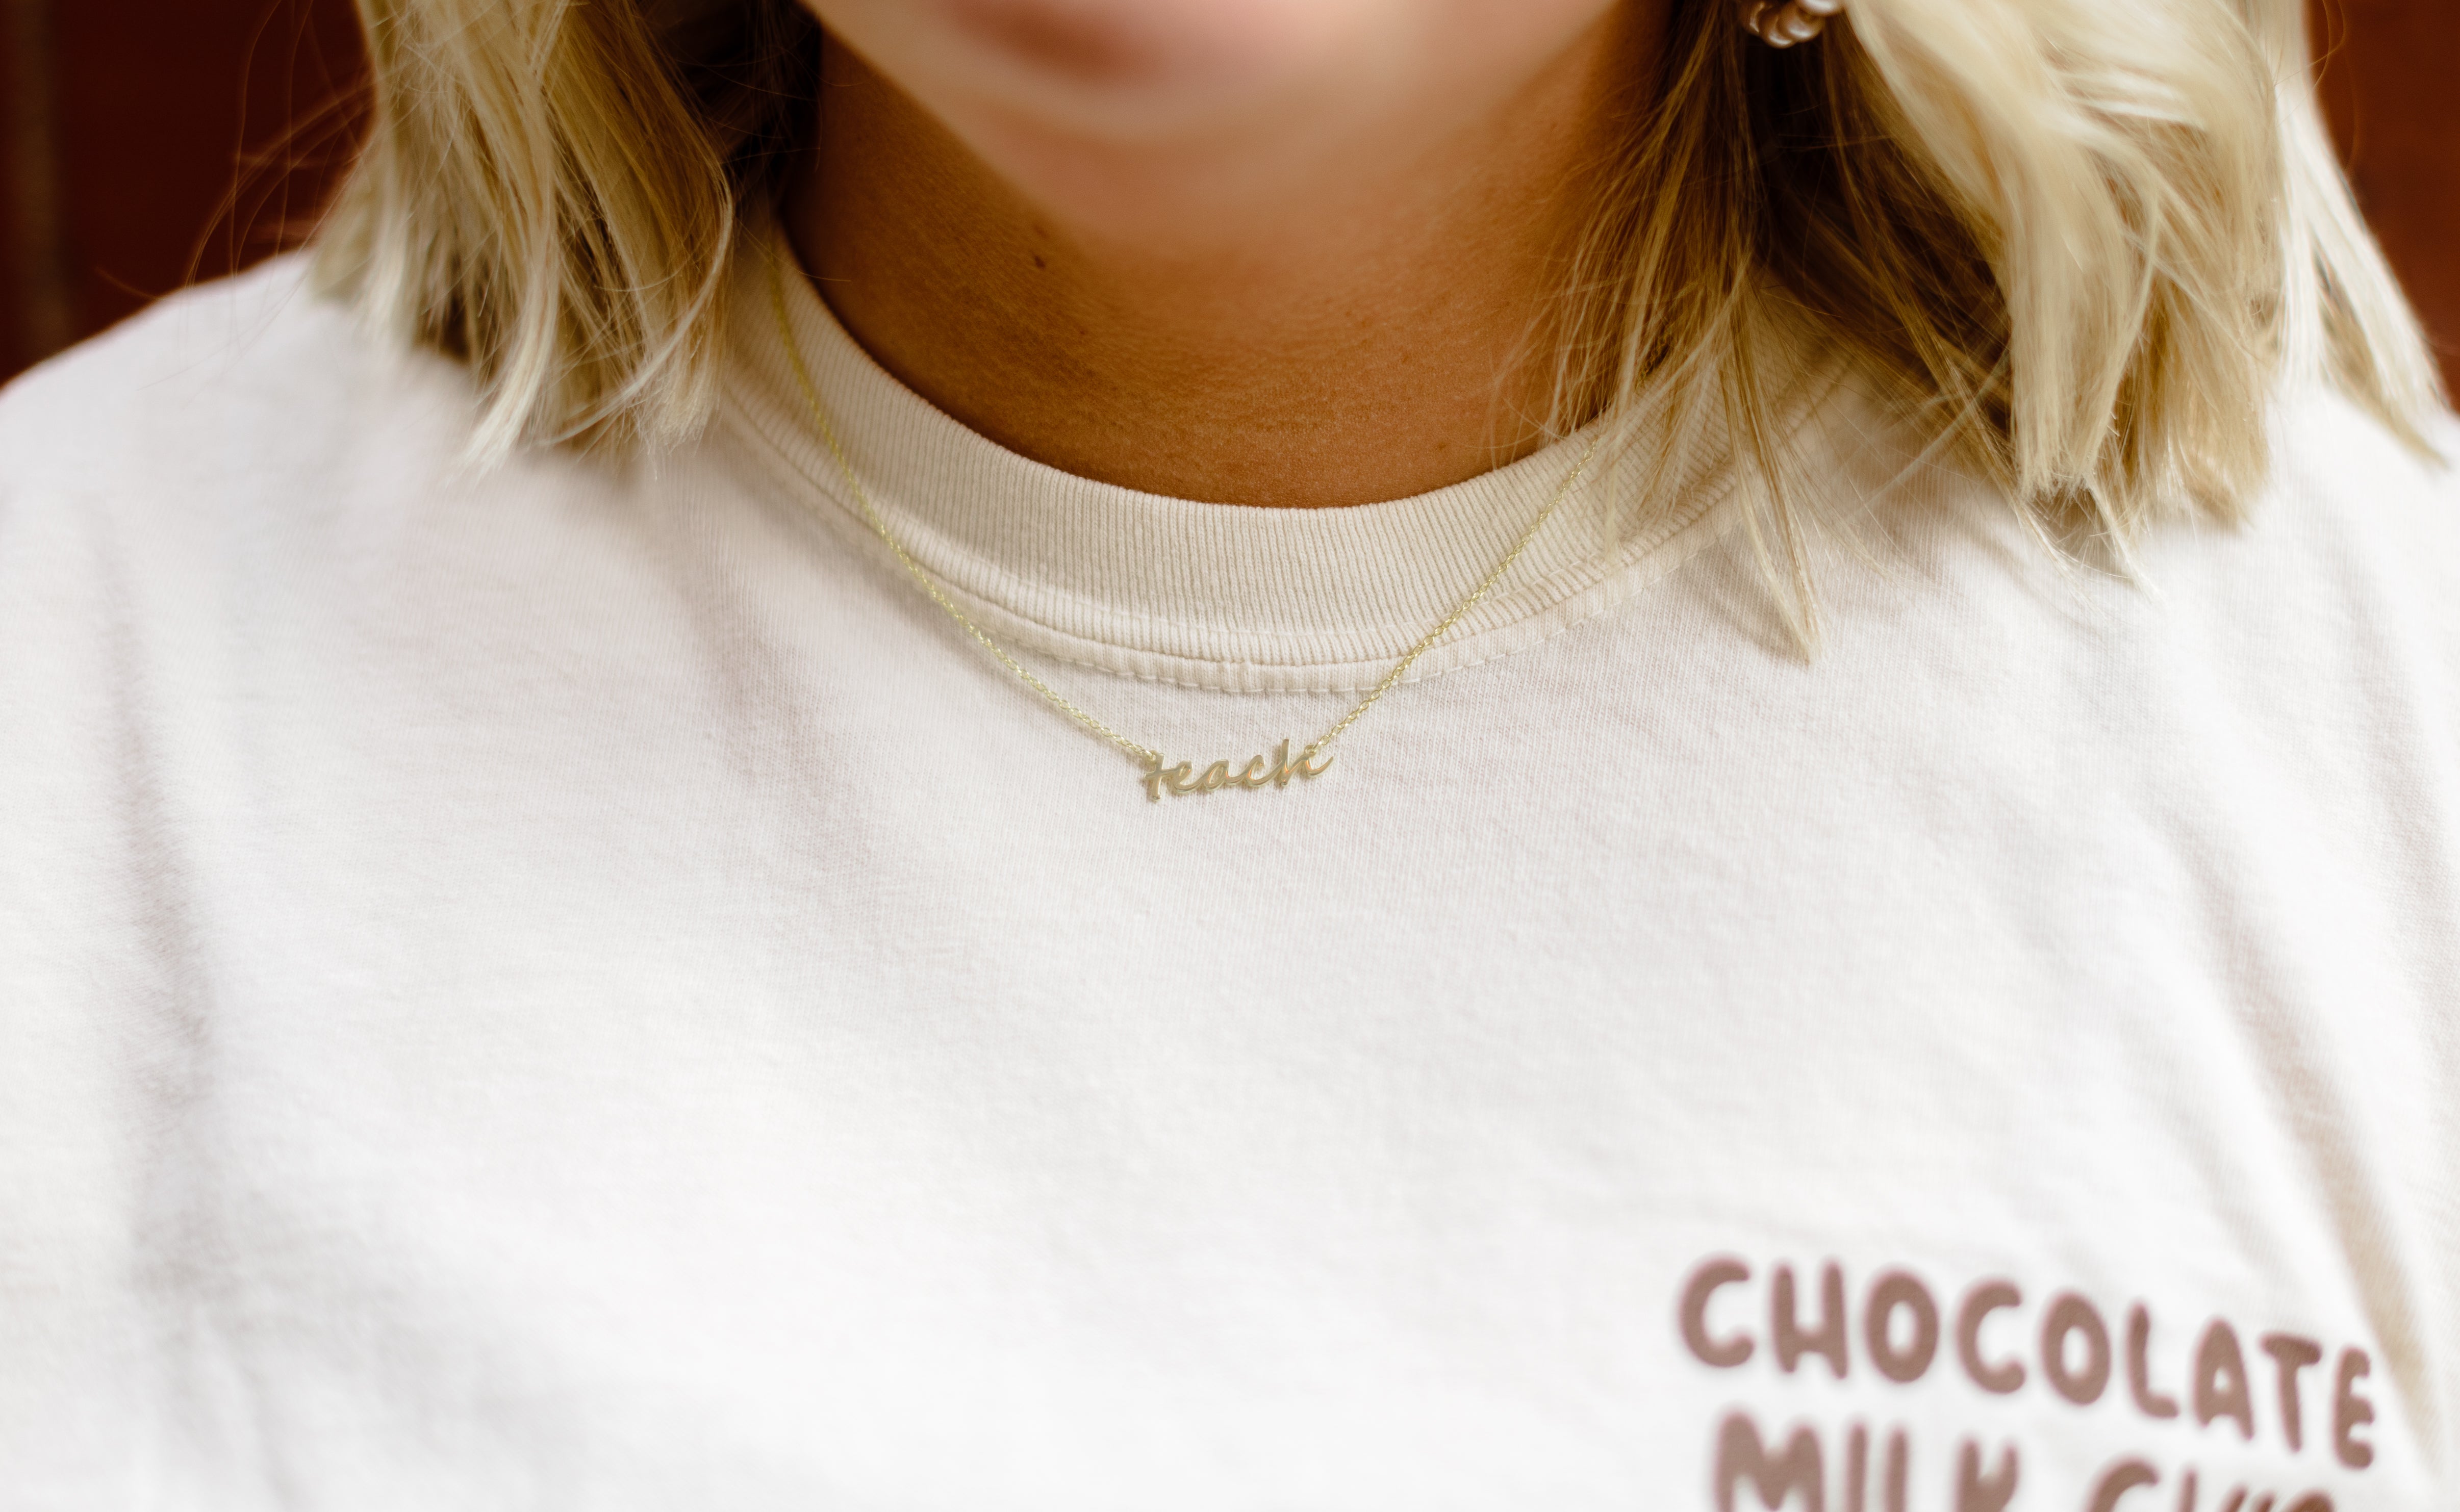 Teach Dainty Yellow Gold Necklace